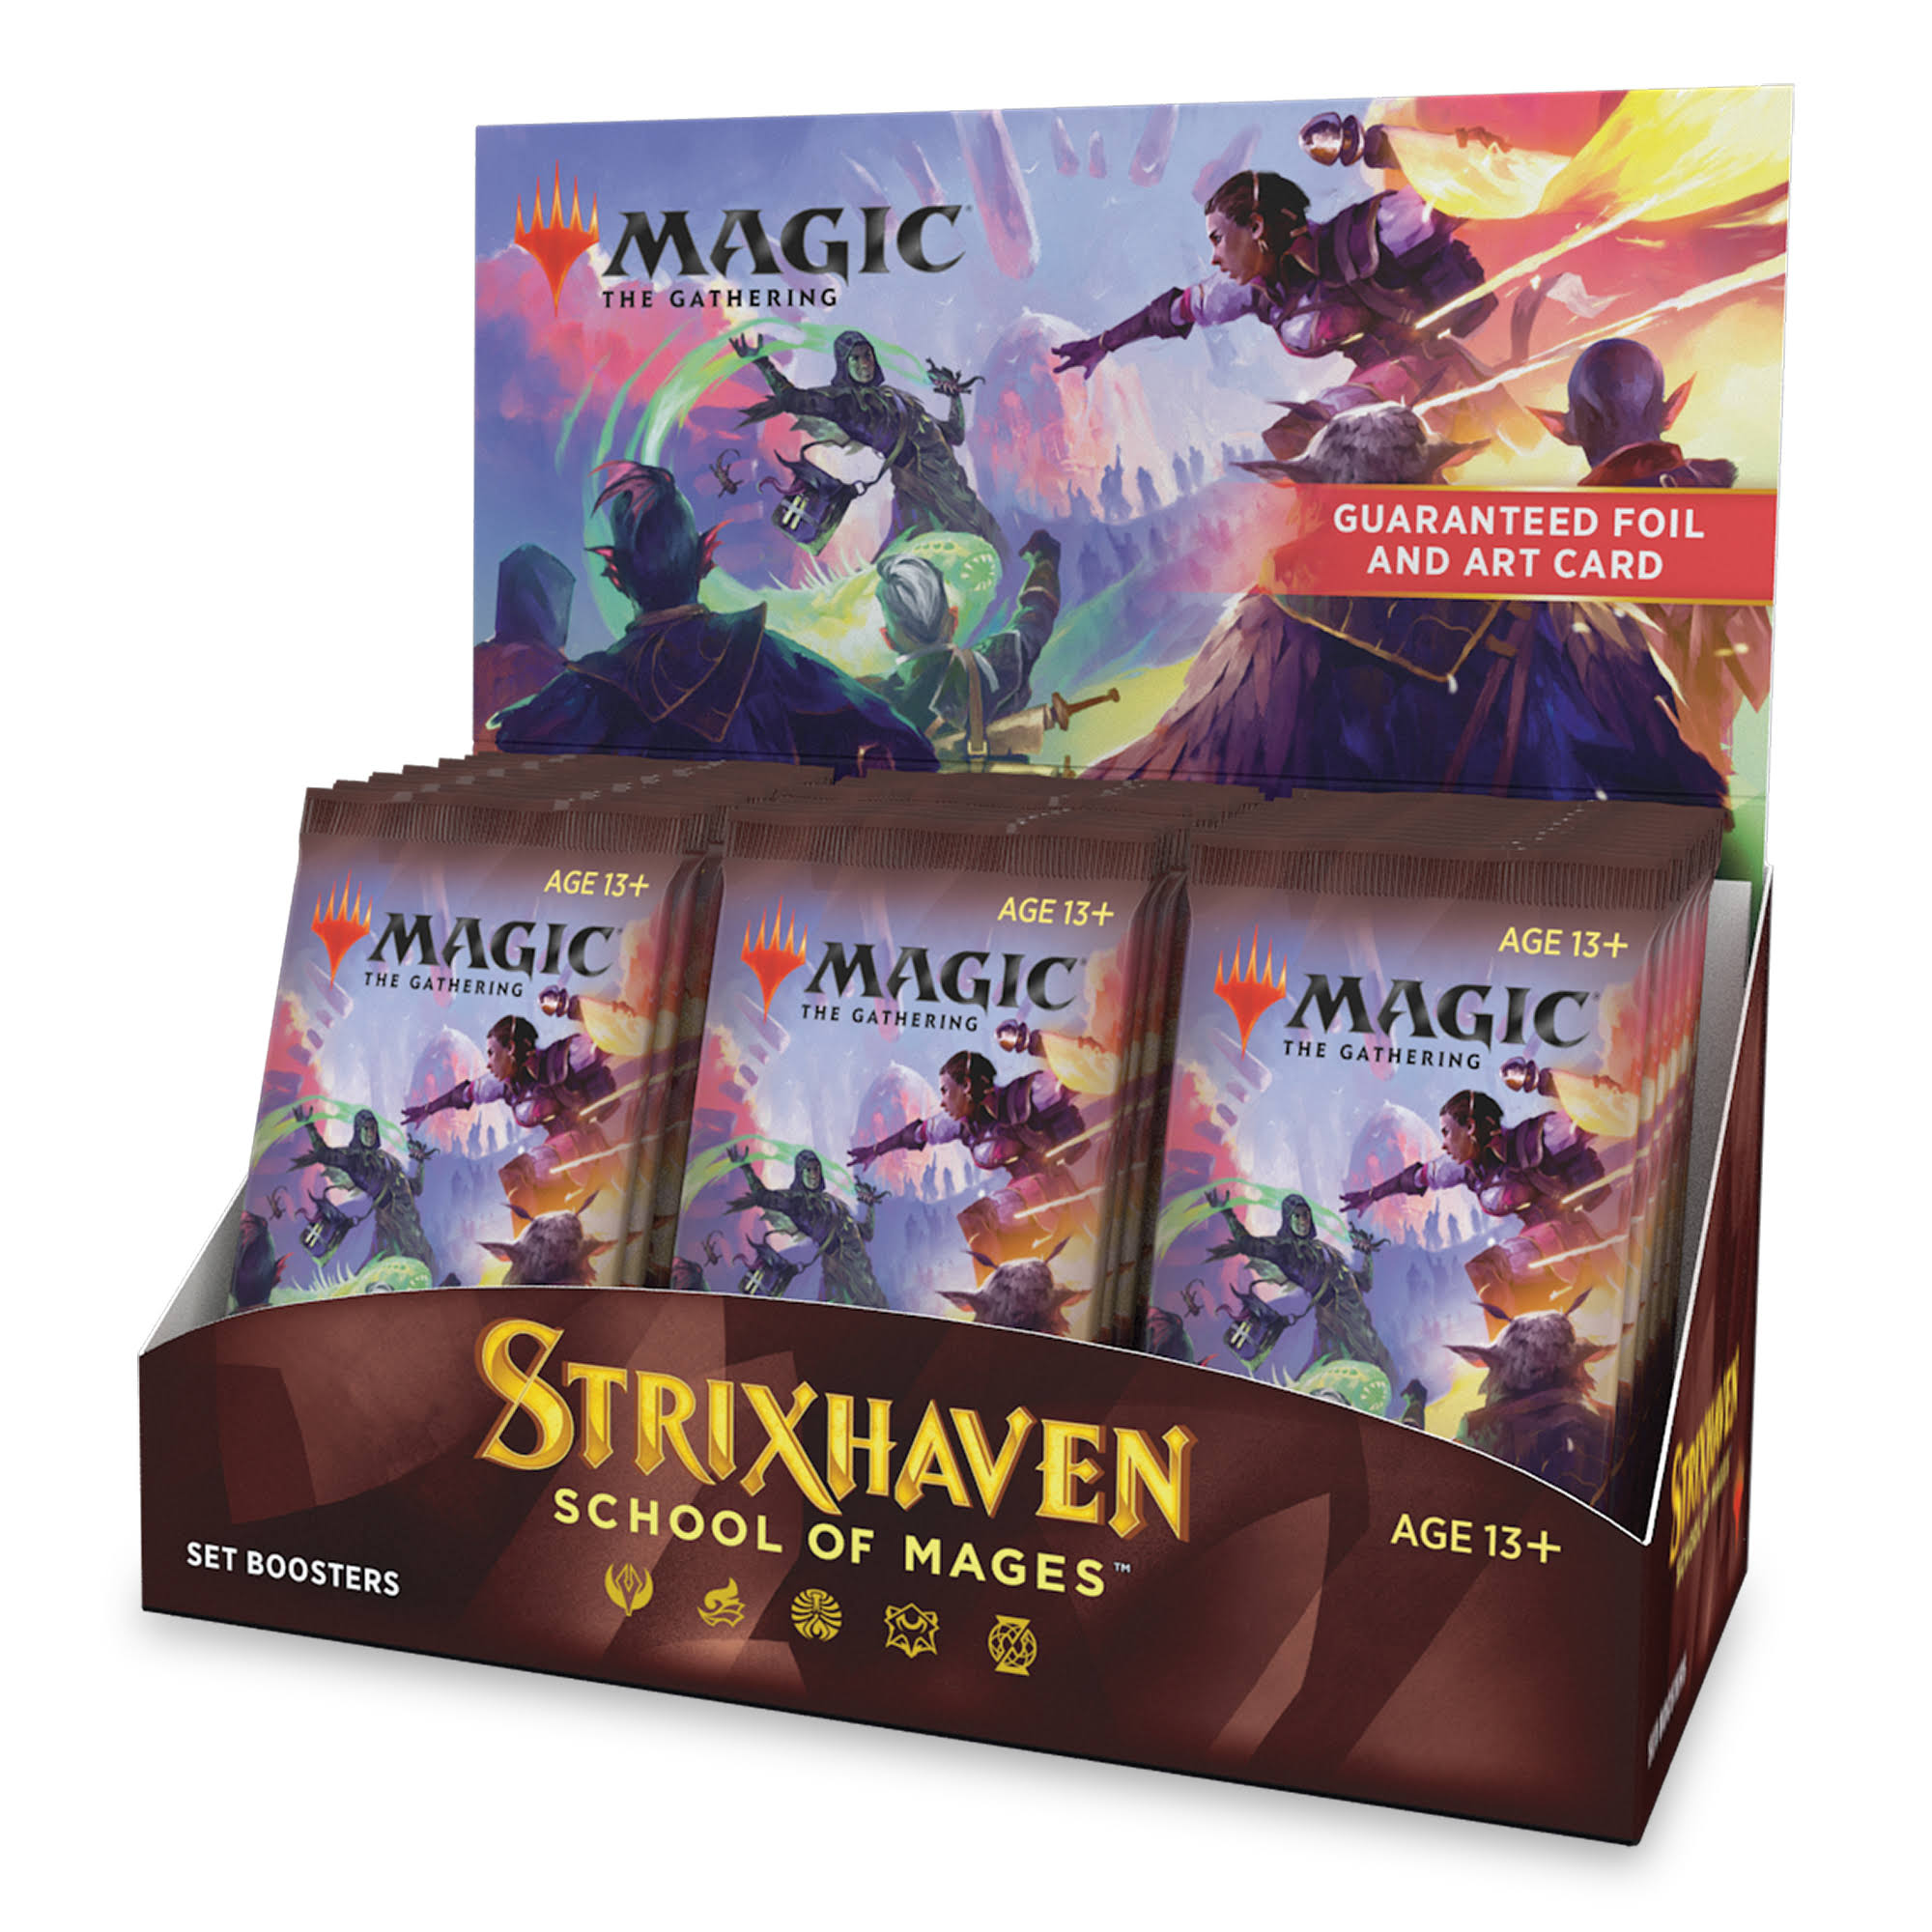 Magic The Gathering Strixhaven School of Mages Set Booster Box